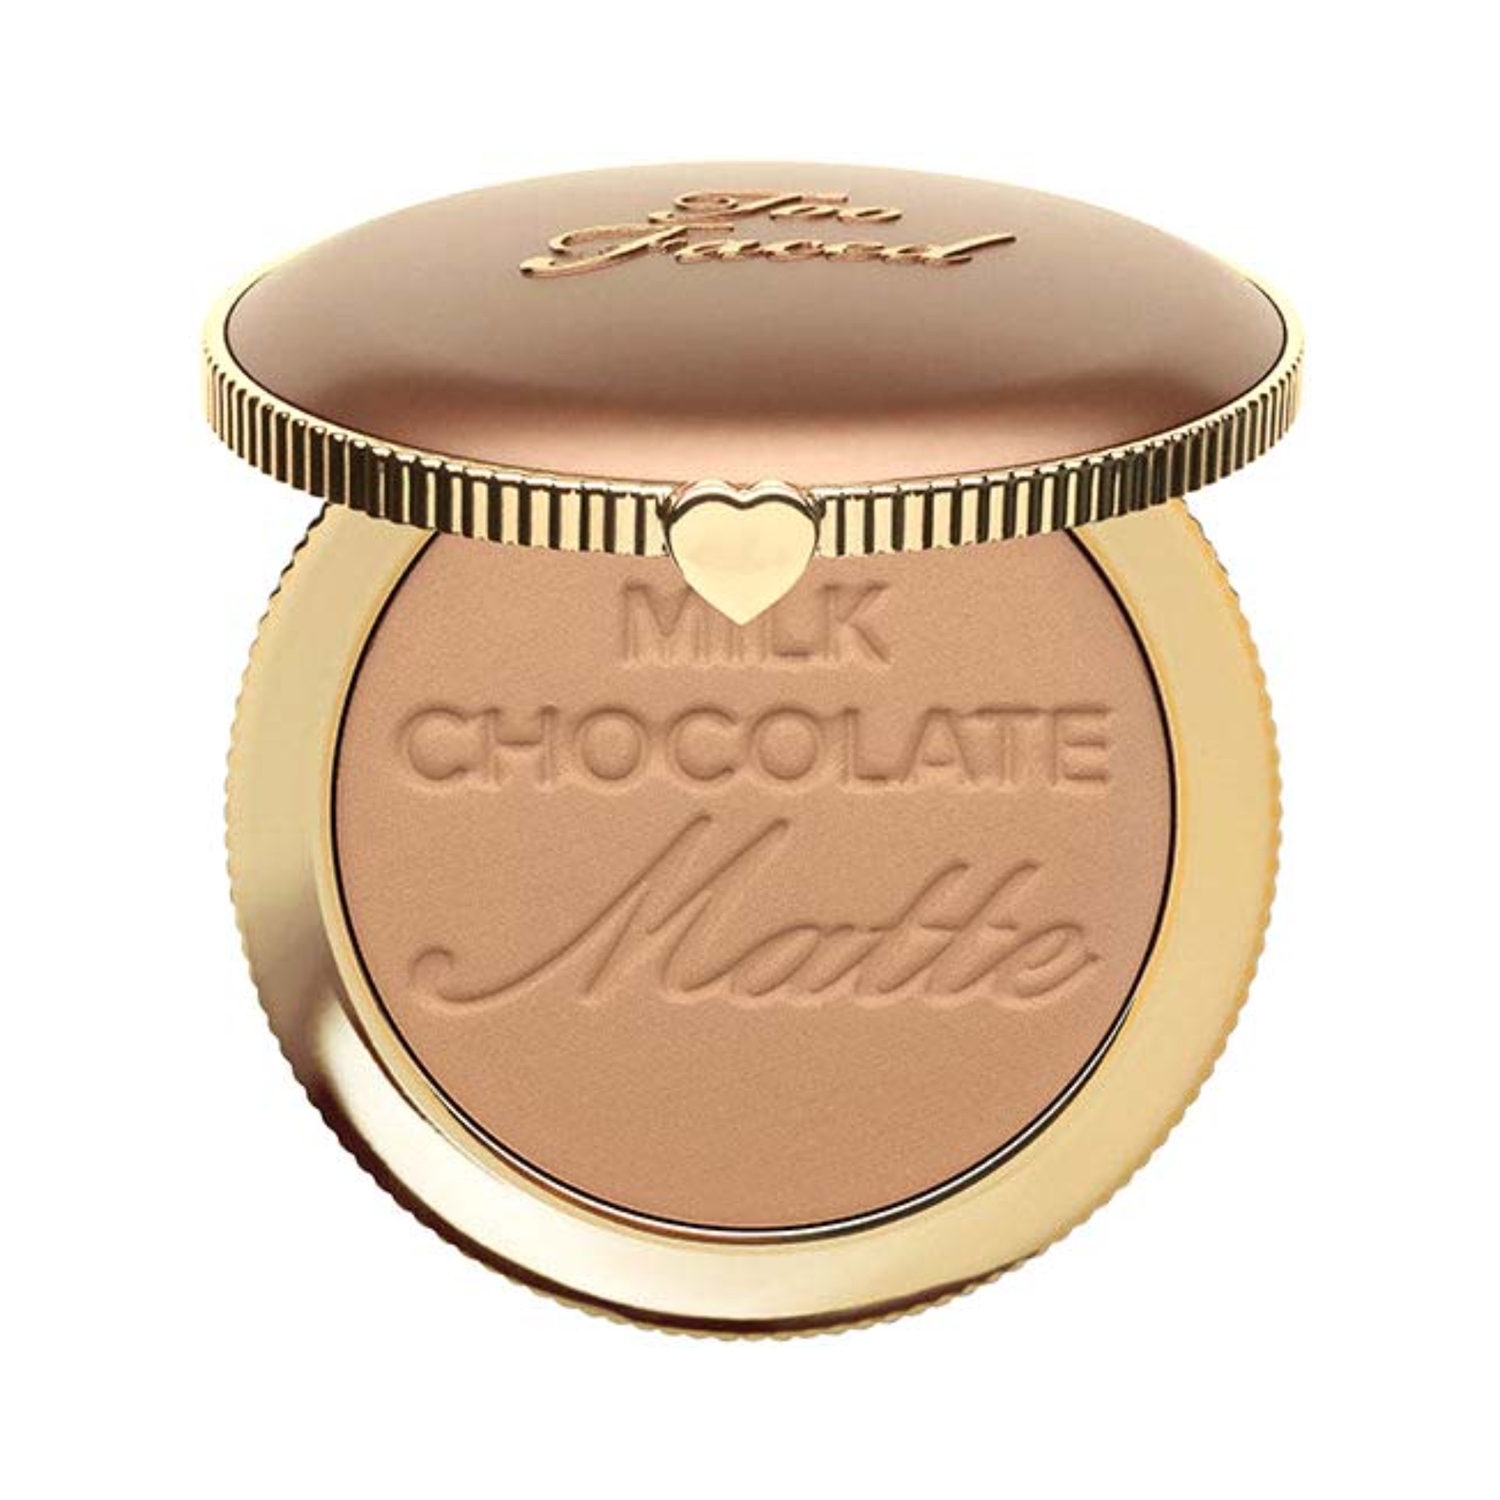 Too Faced | Too Faced Chocolate Soleil Natural Chocolate Bronzer - Caramel Cocoa (9g)